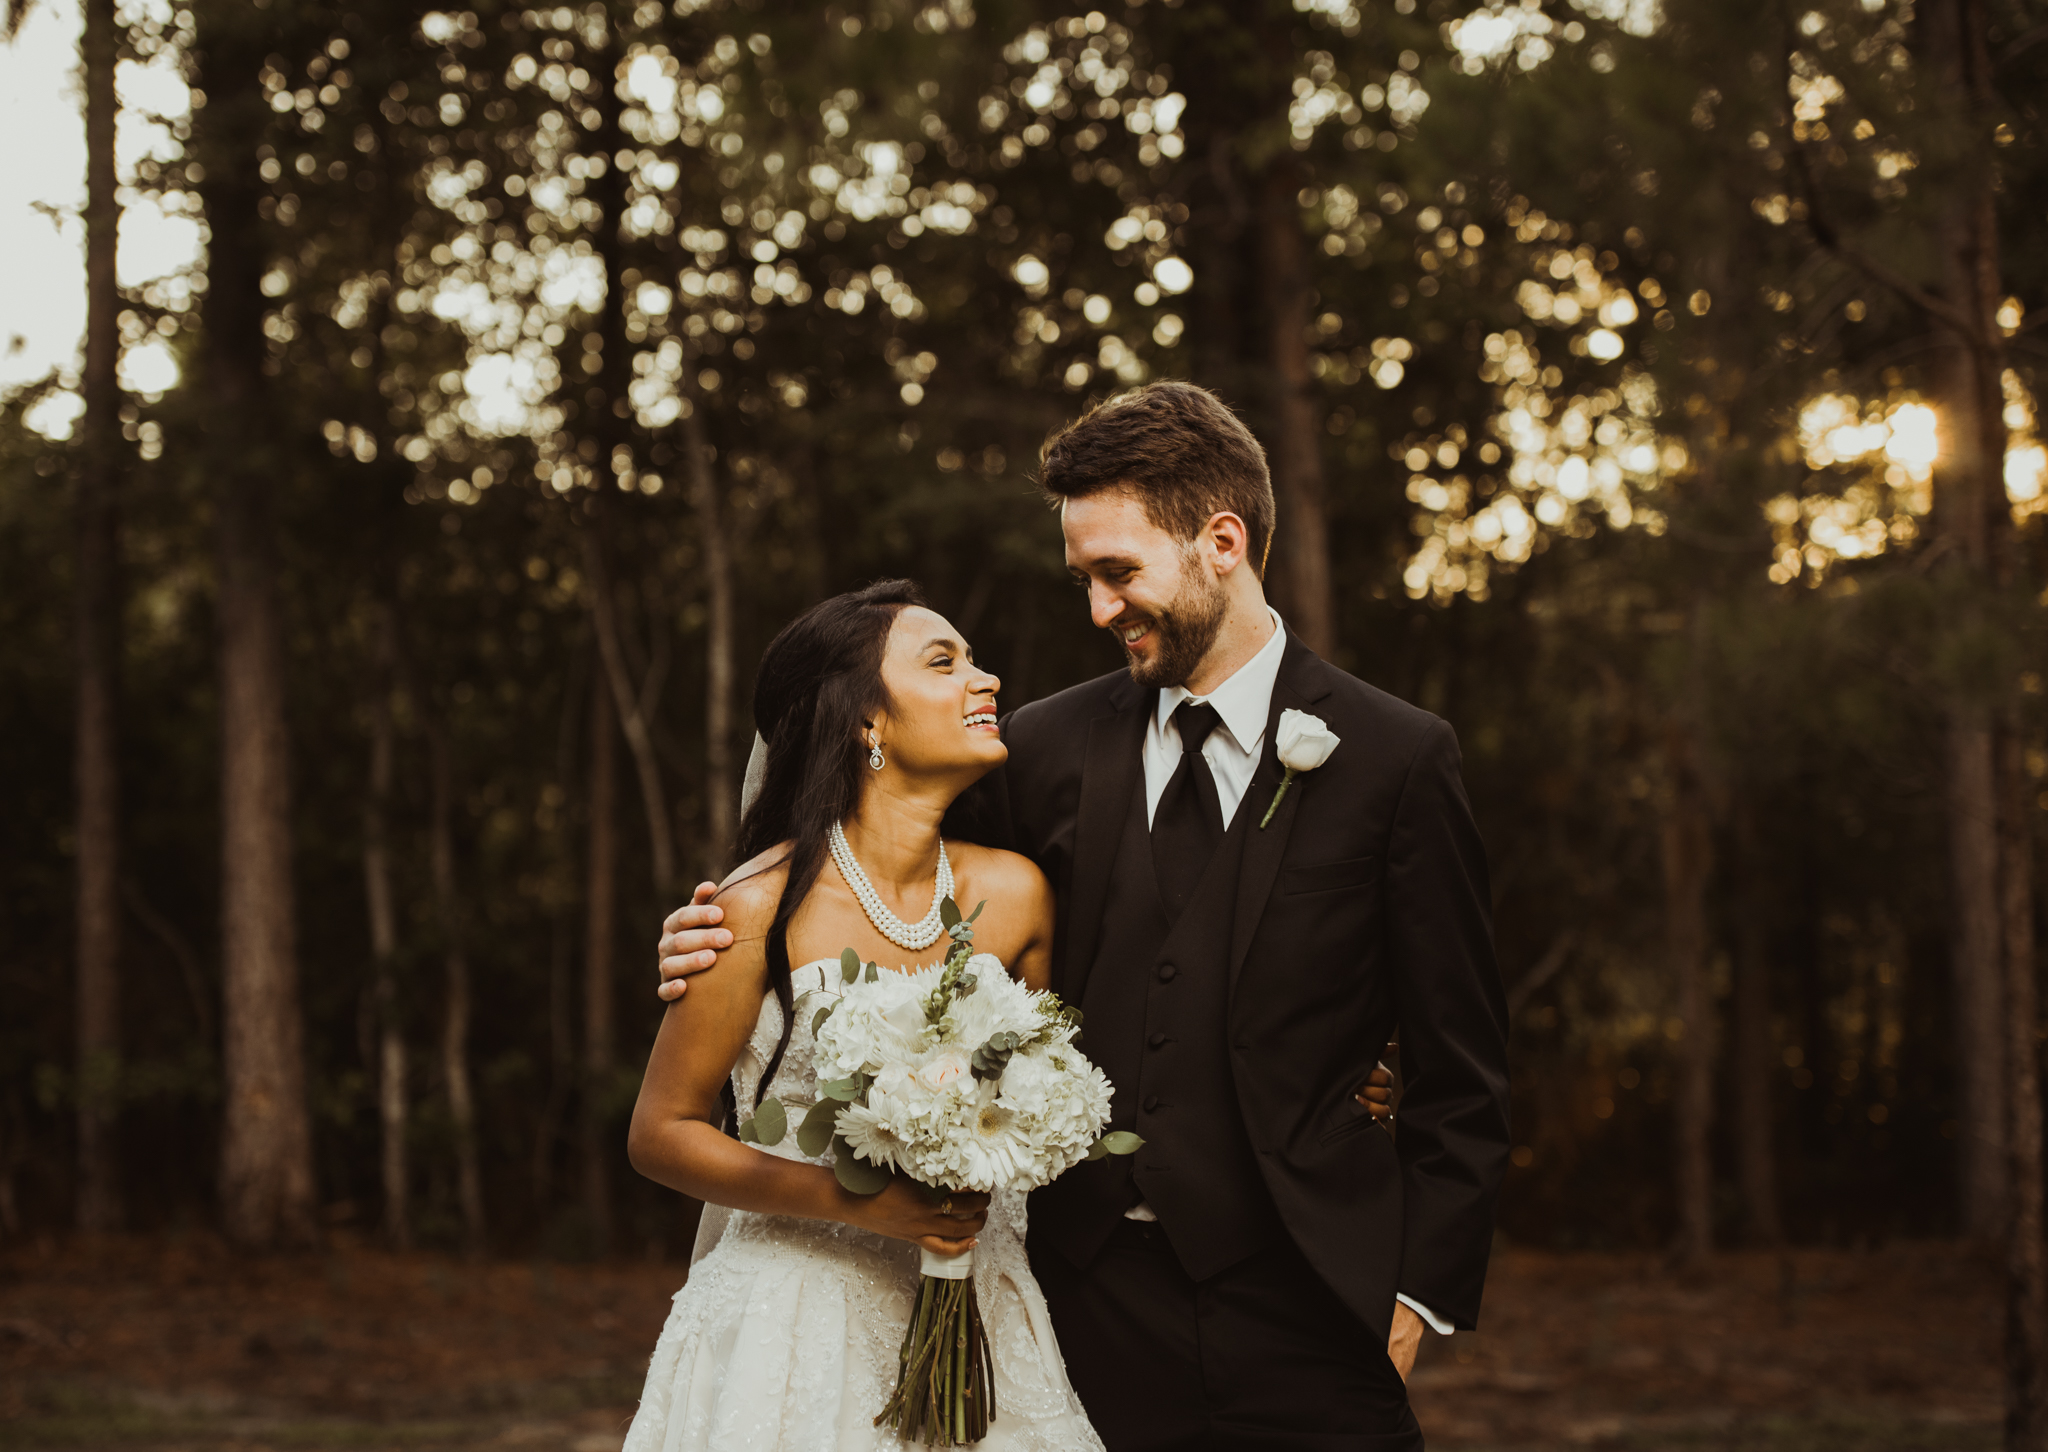 ©Isaiah & Taylor Photography - Lakeside Barn Wedding, Private Estate, Poplarville Mississippi-97.jpg